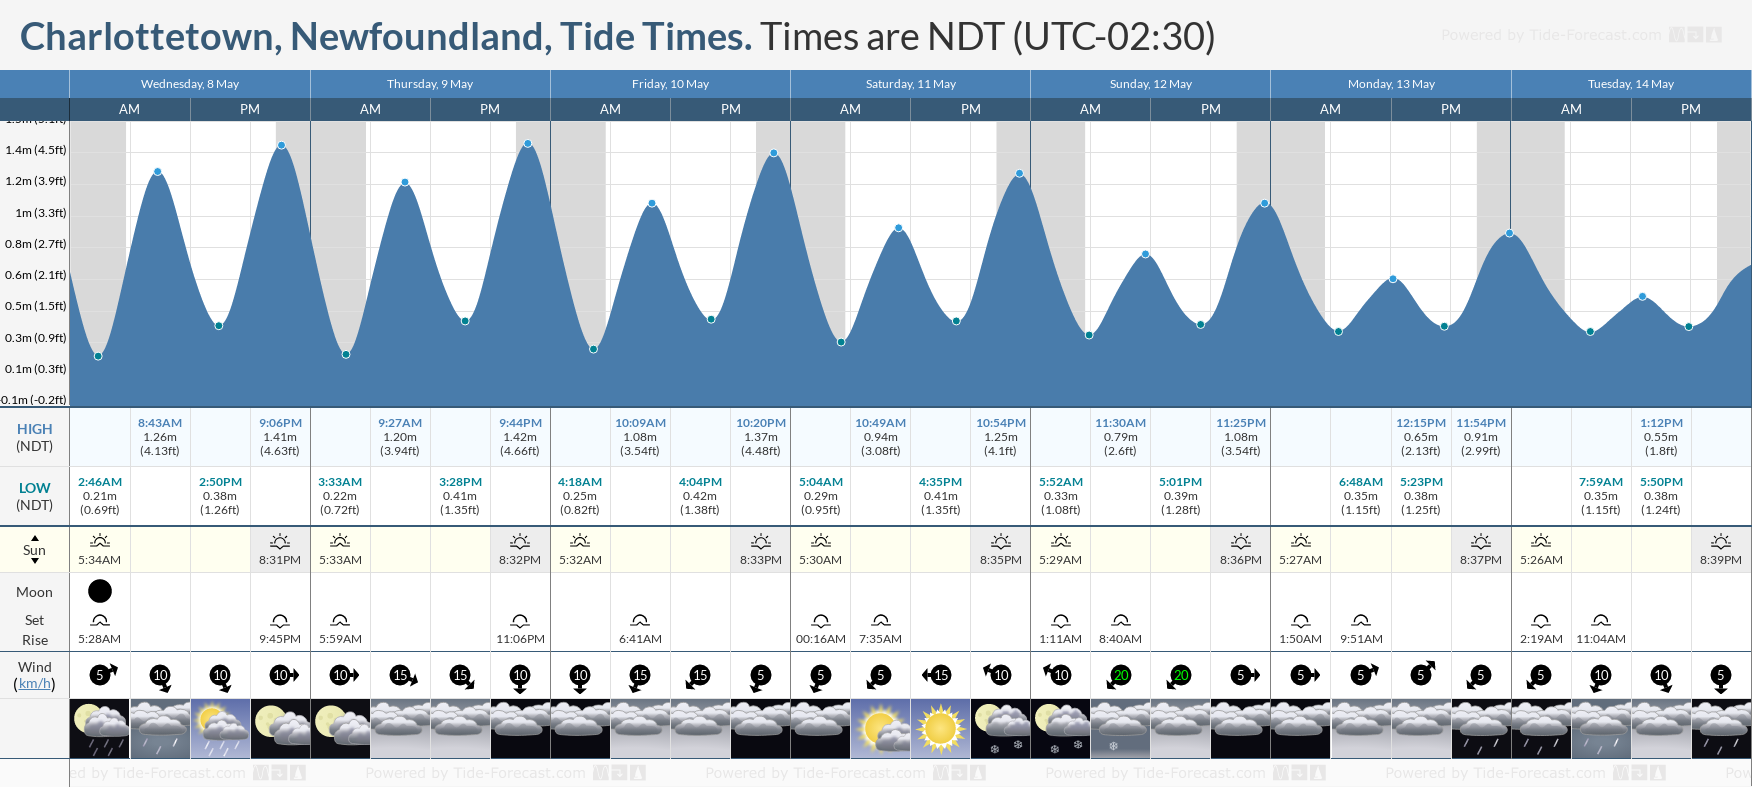 Charlottetown, Newfoundland Tide Chart including high and low tide tide times for the next 7 days